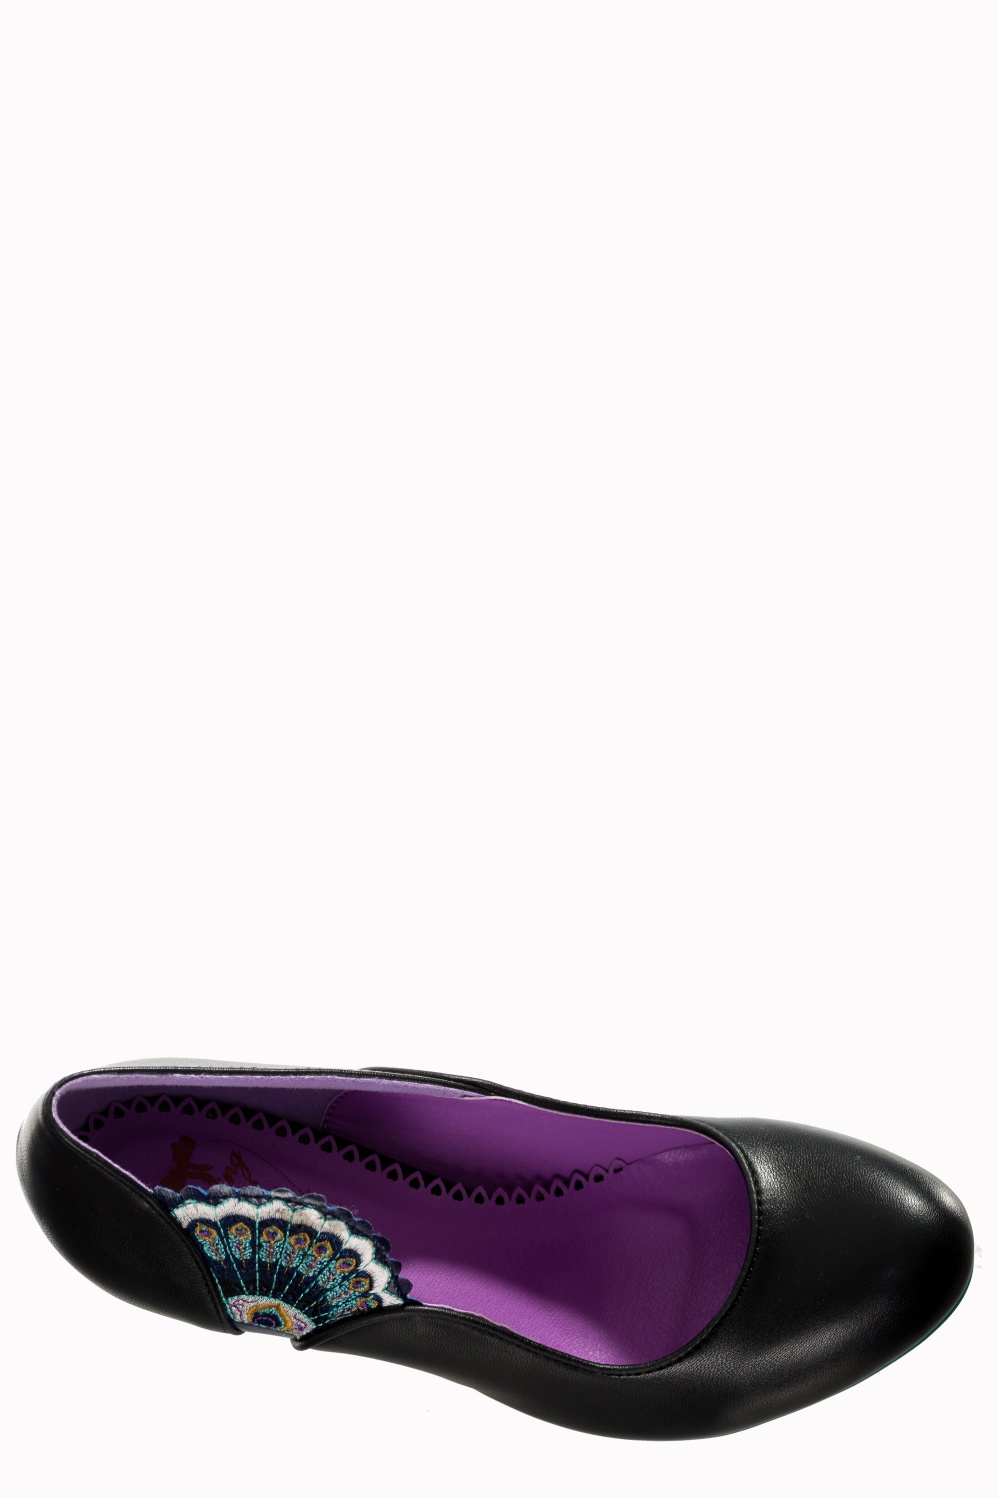 Dancing Days Sway 50s Black Peacock Shoes